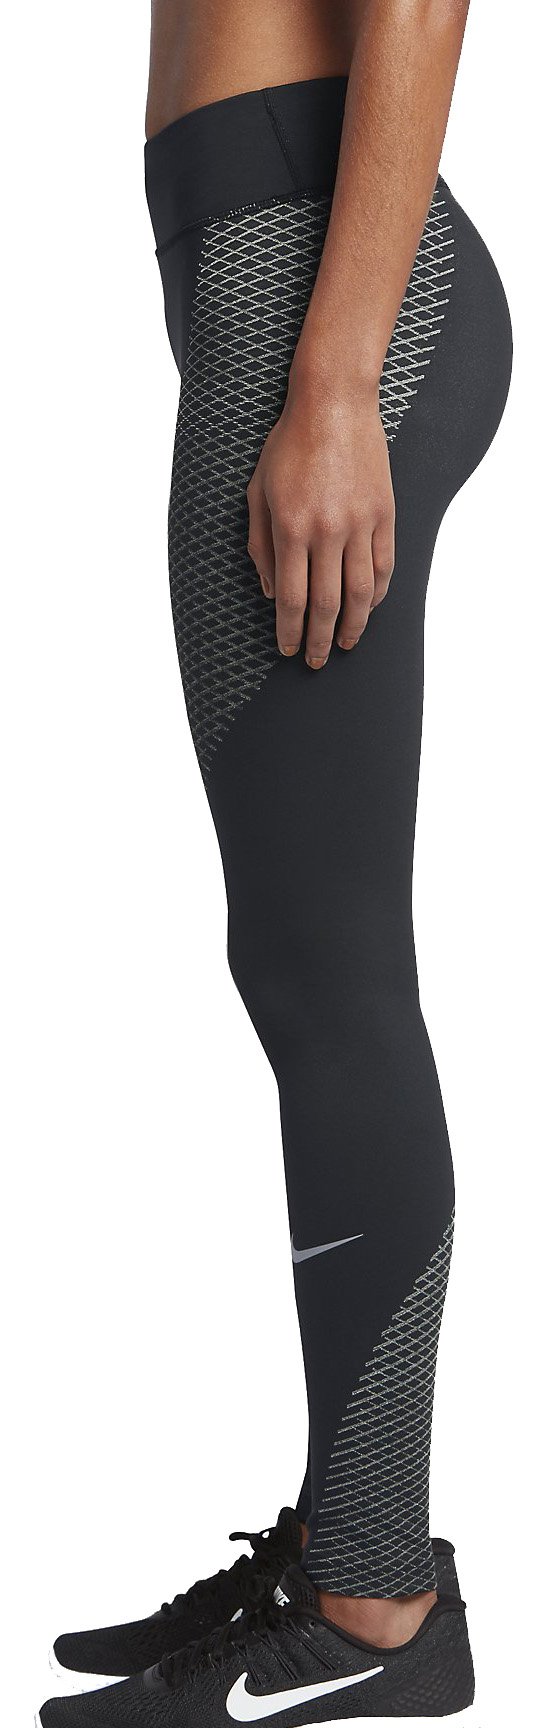 The Right Tights: Nike Zonal Strength Running Tights 